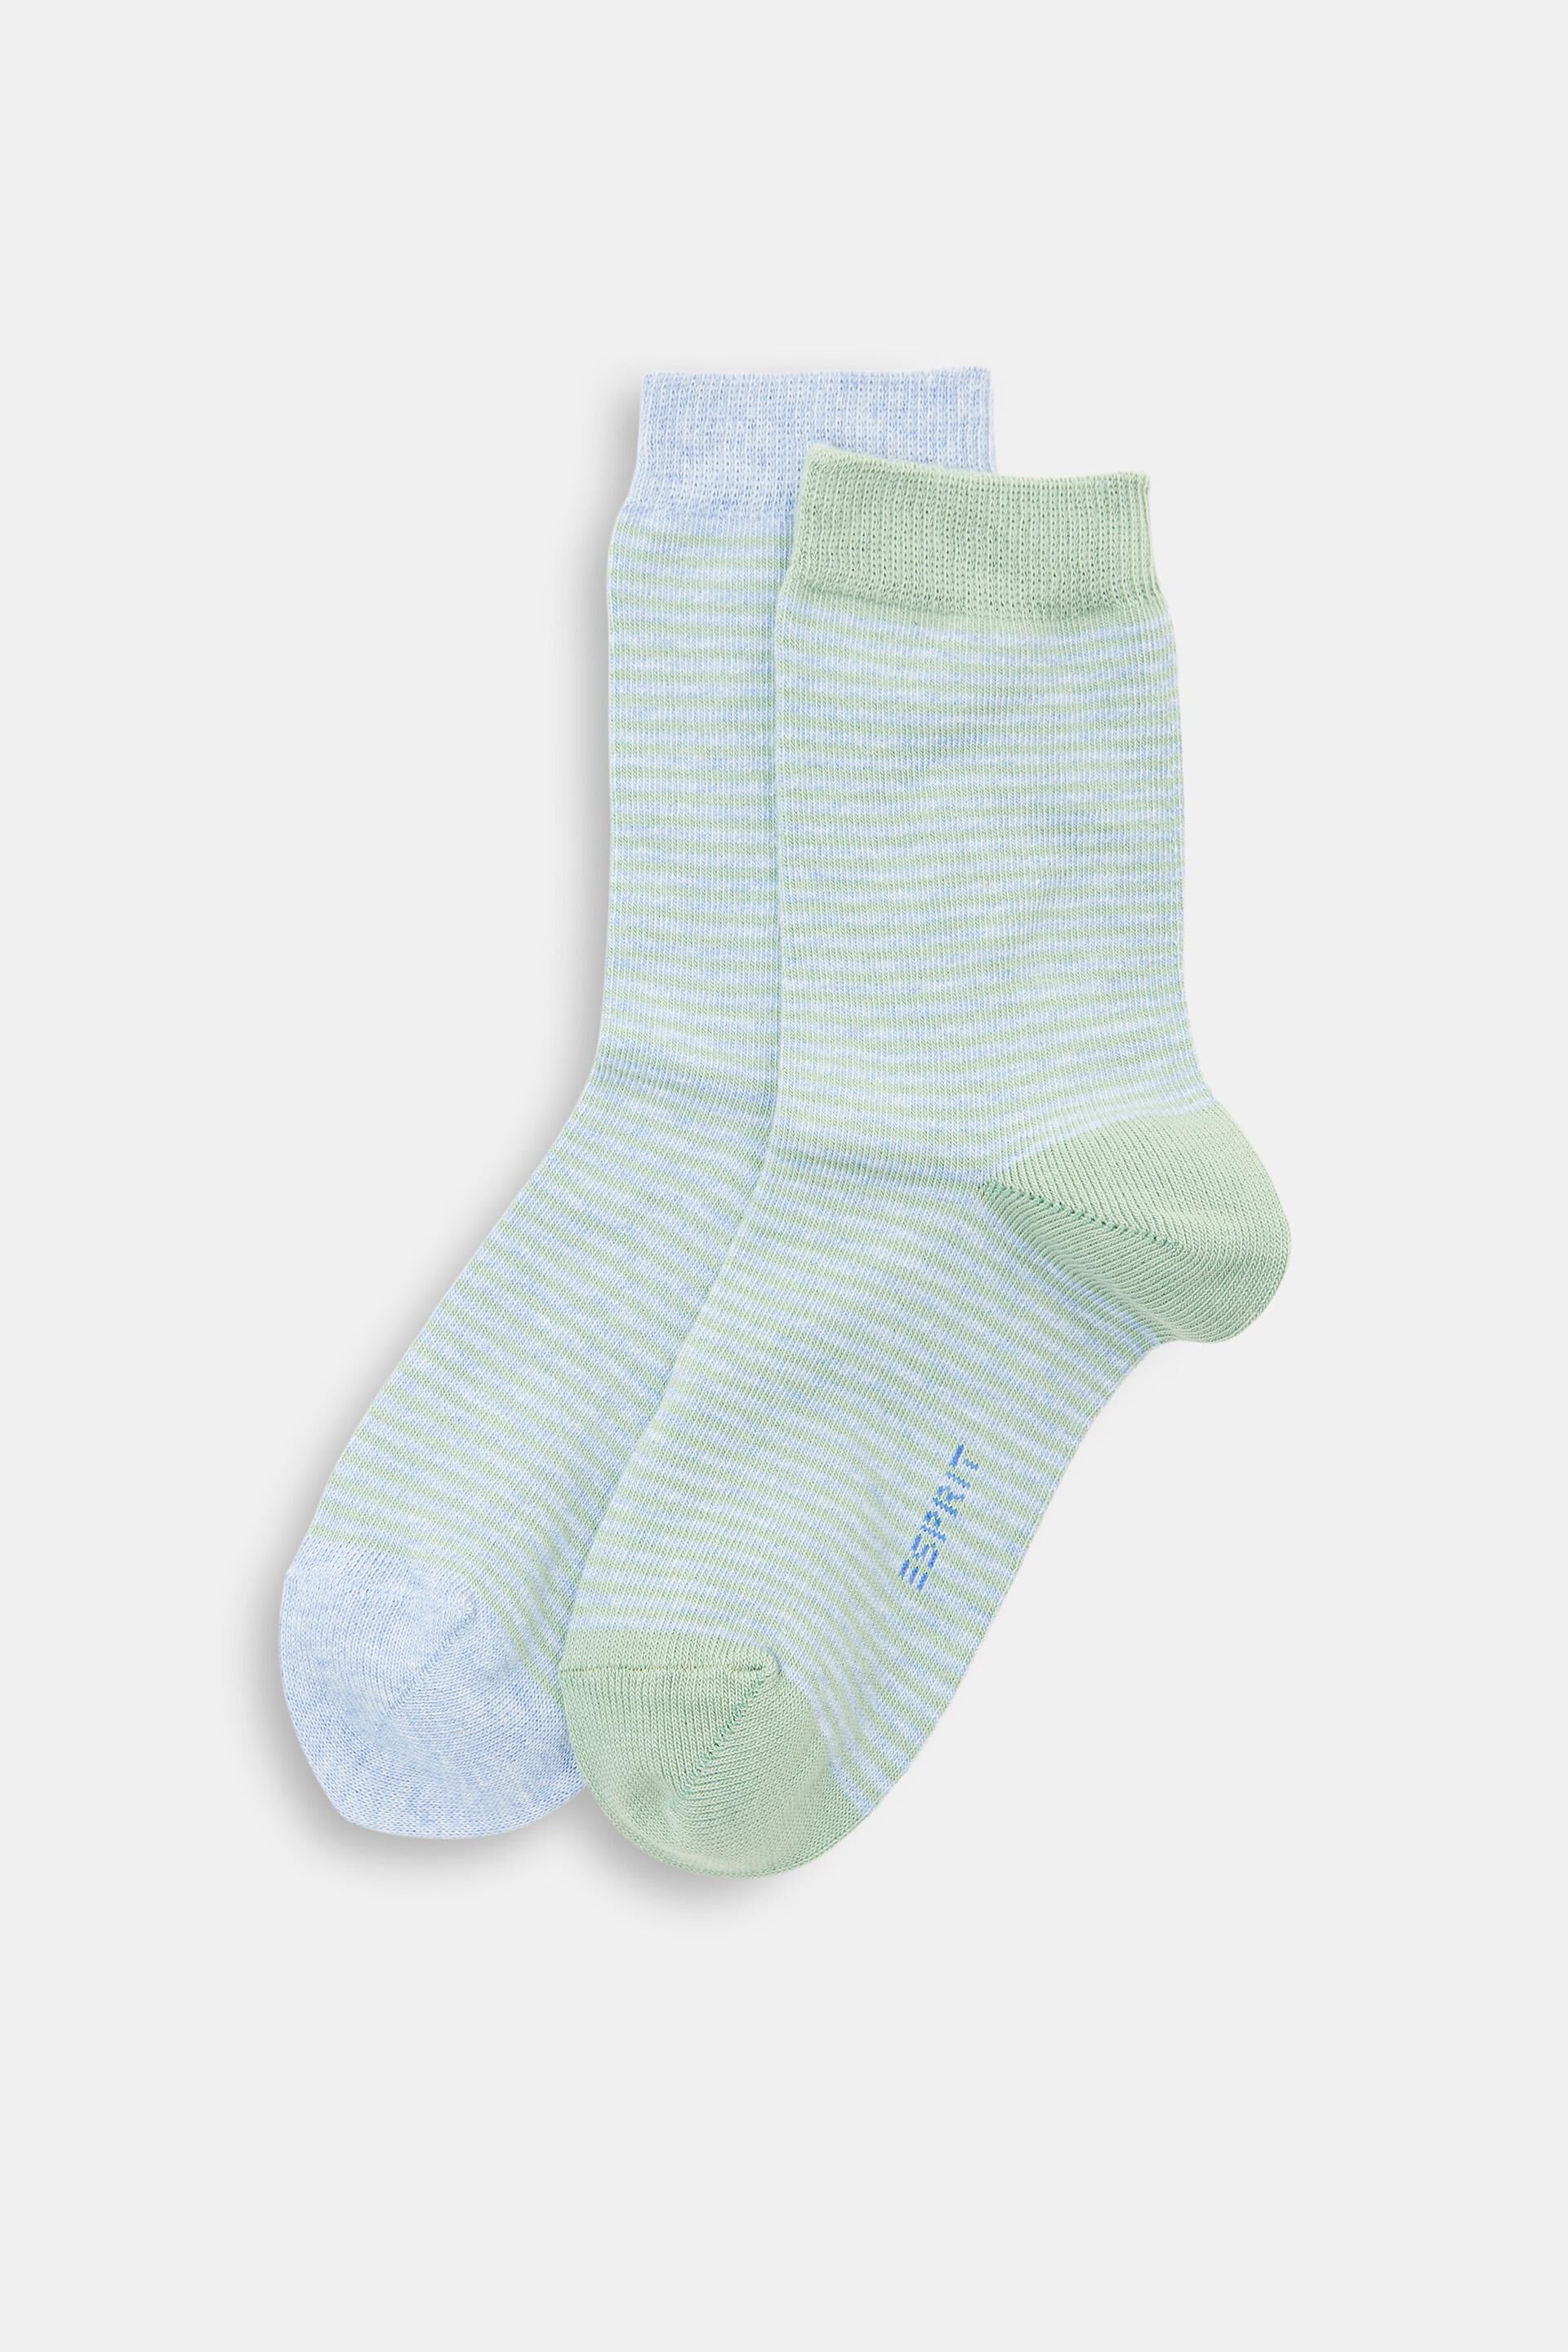 Esprit striped socks, cotton of Double organic pack